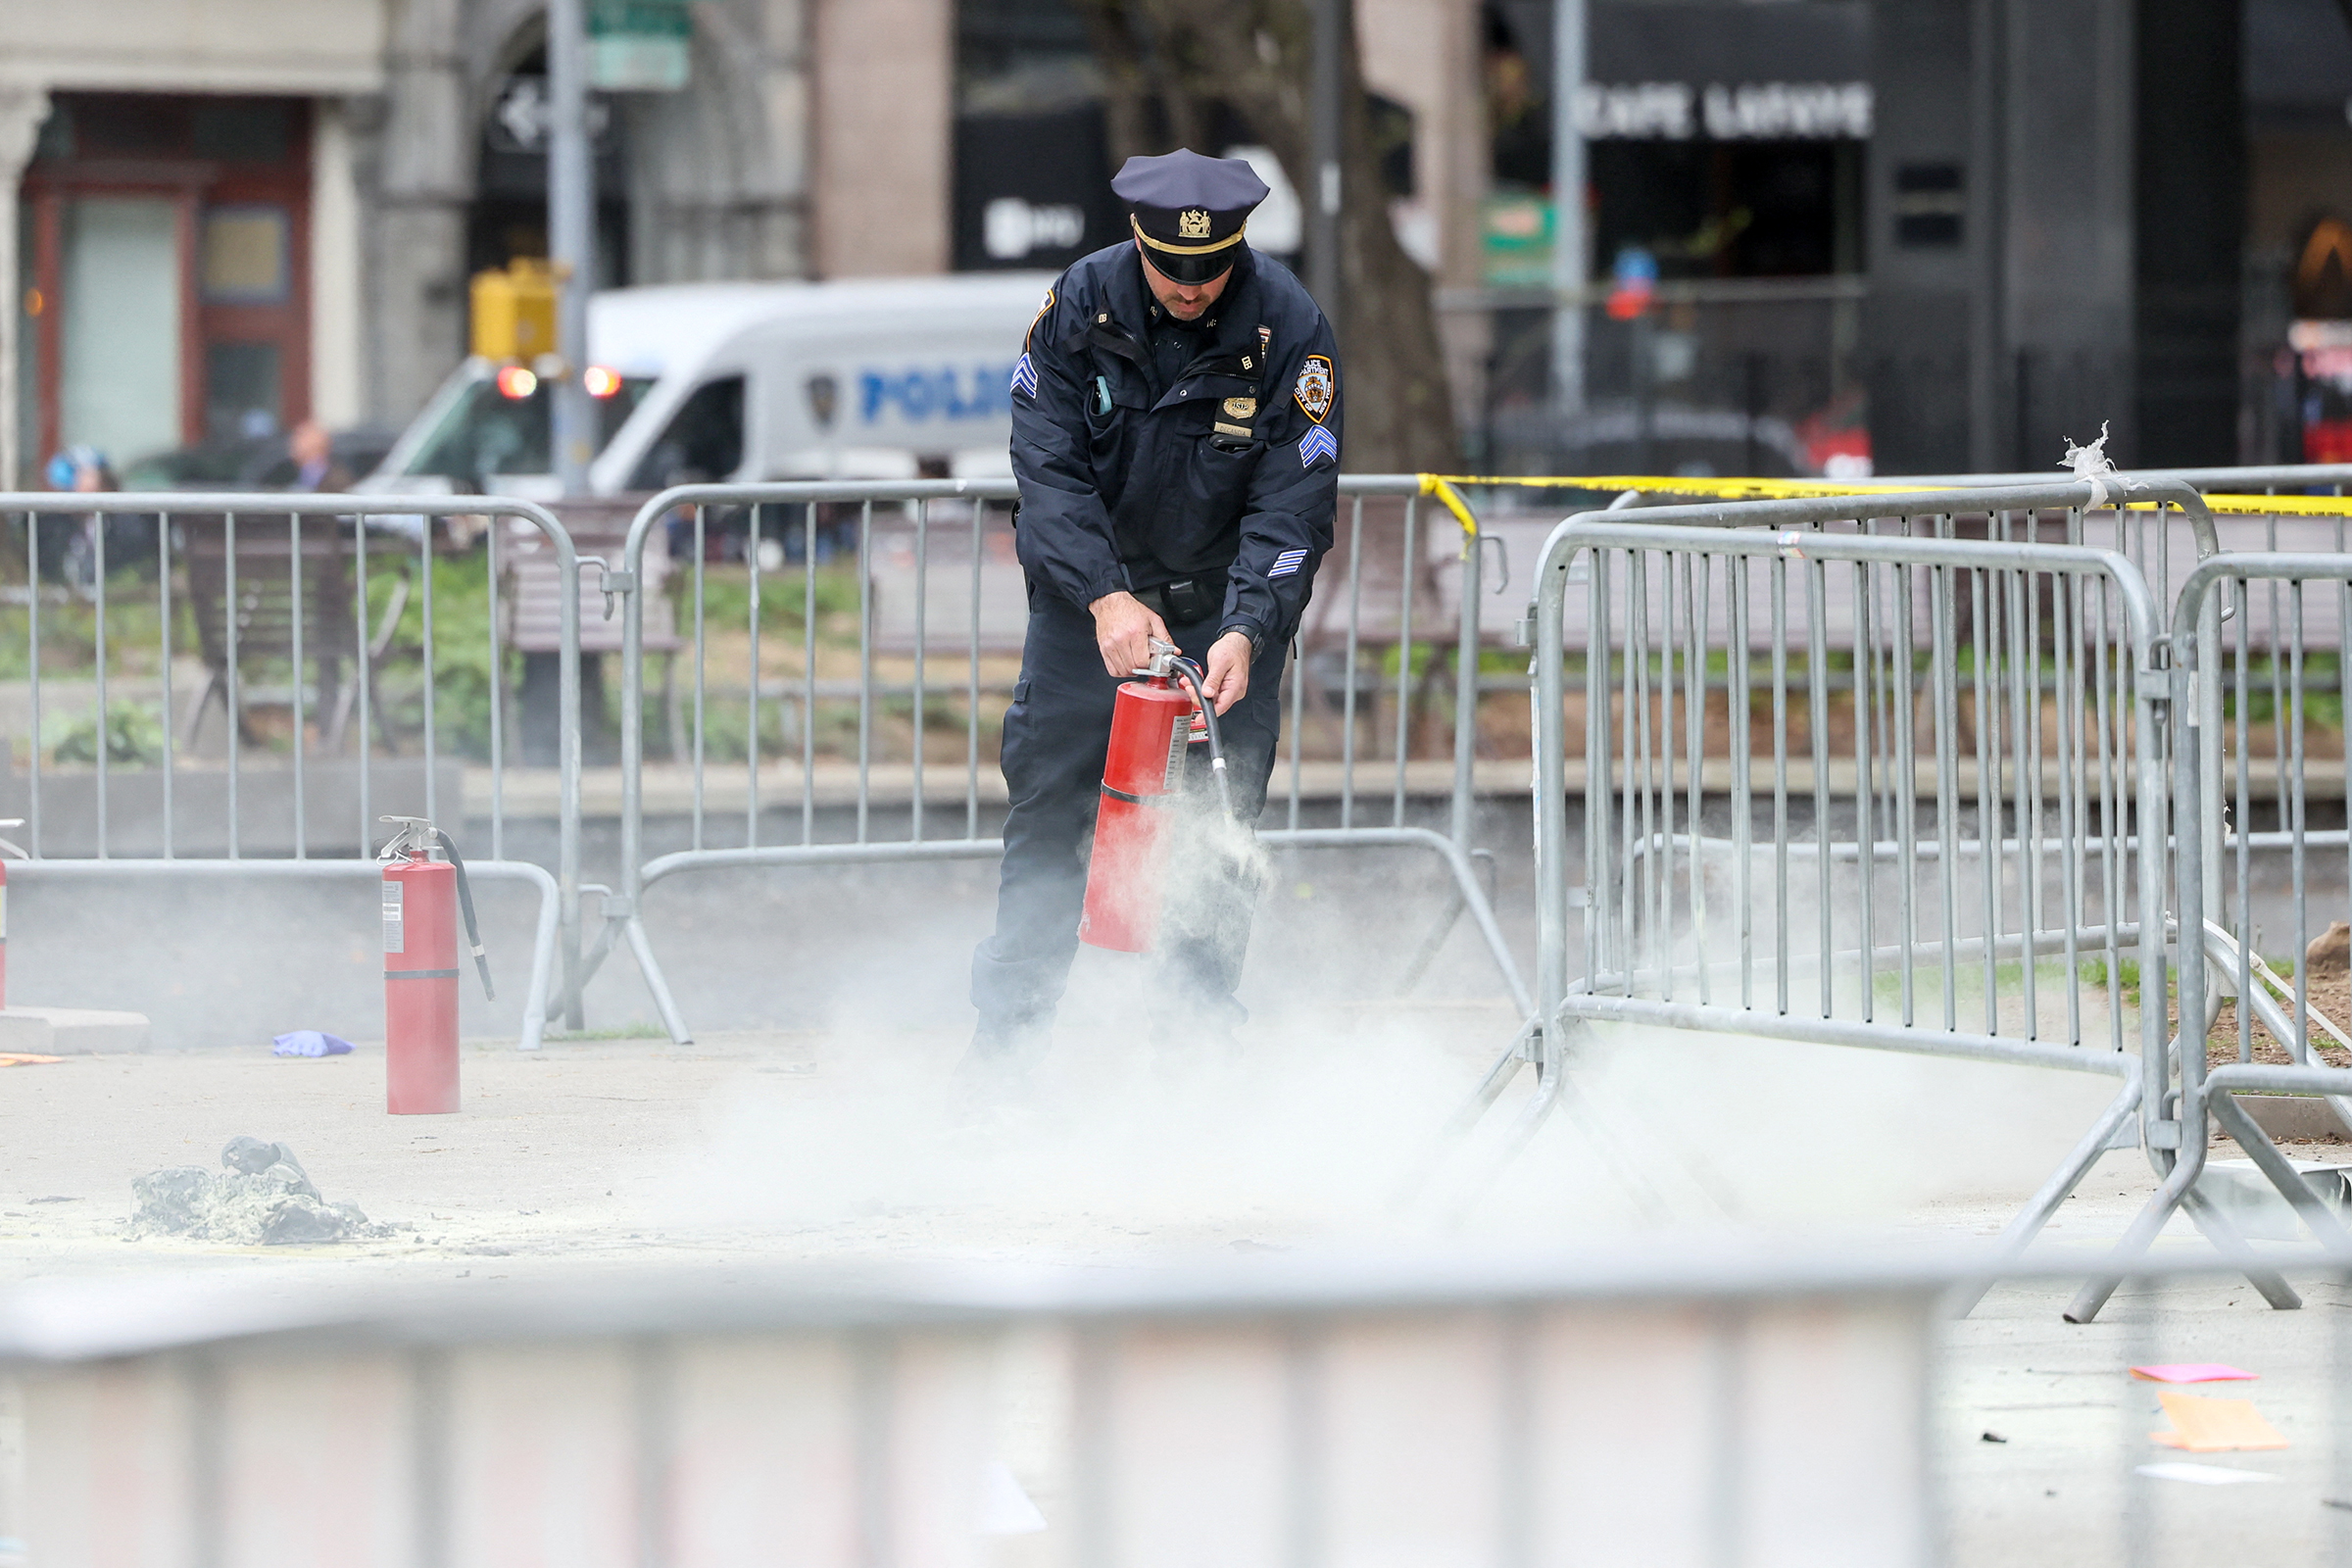 A police officer uses a fire extinguisher as emergency personnel respond to a report of a person covered in flames outside the courthouse where former President Donald Trump's criminal hush money trial is underway in New York on Friday.